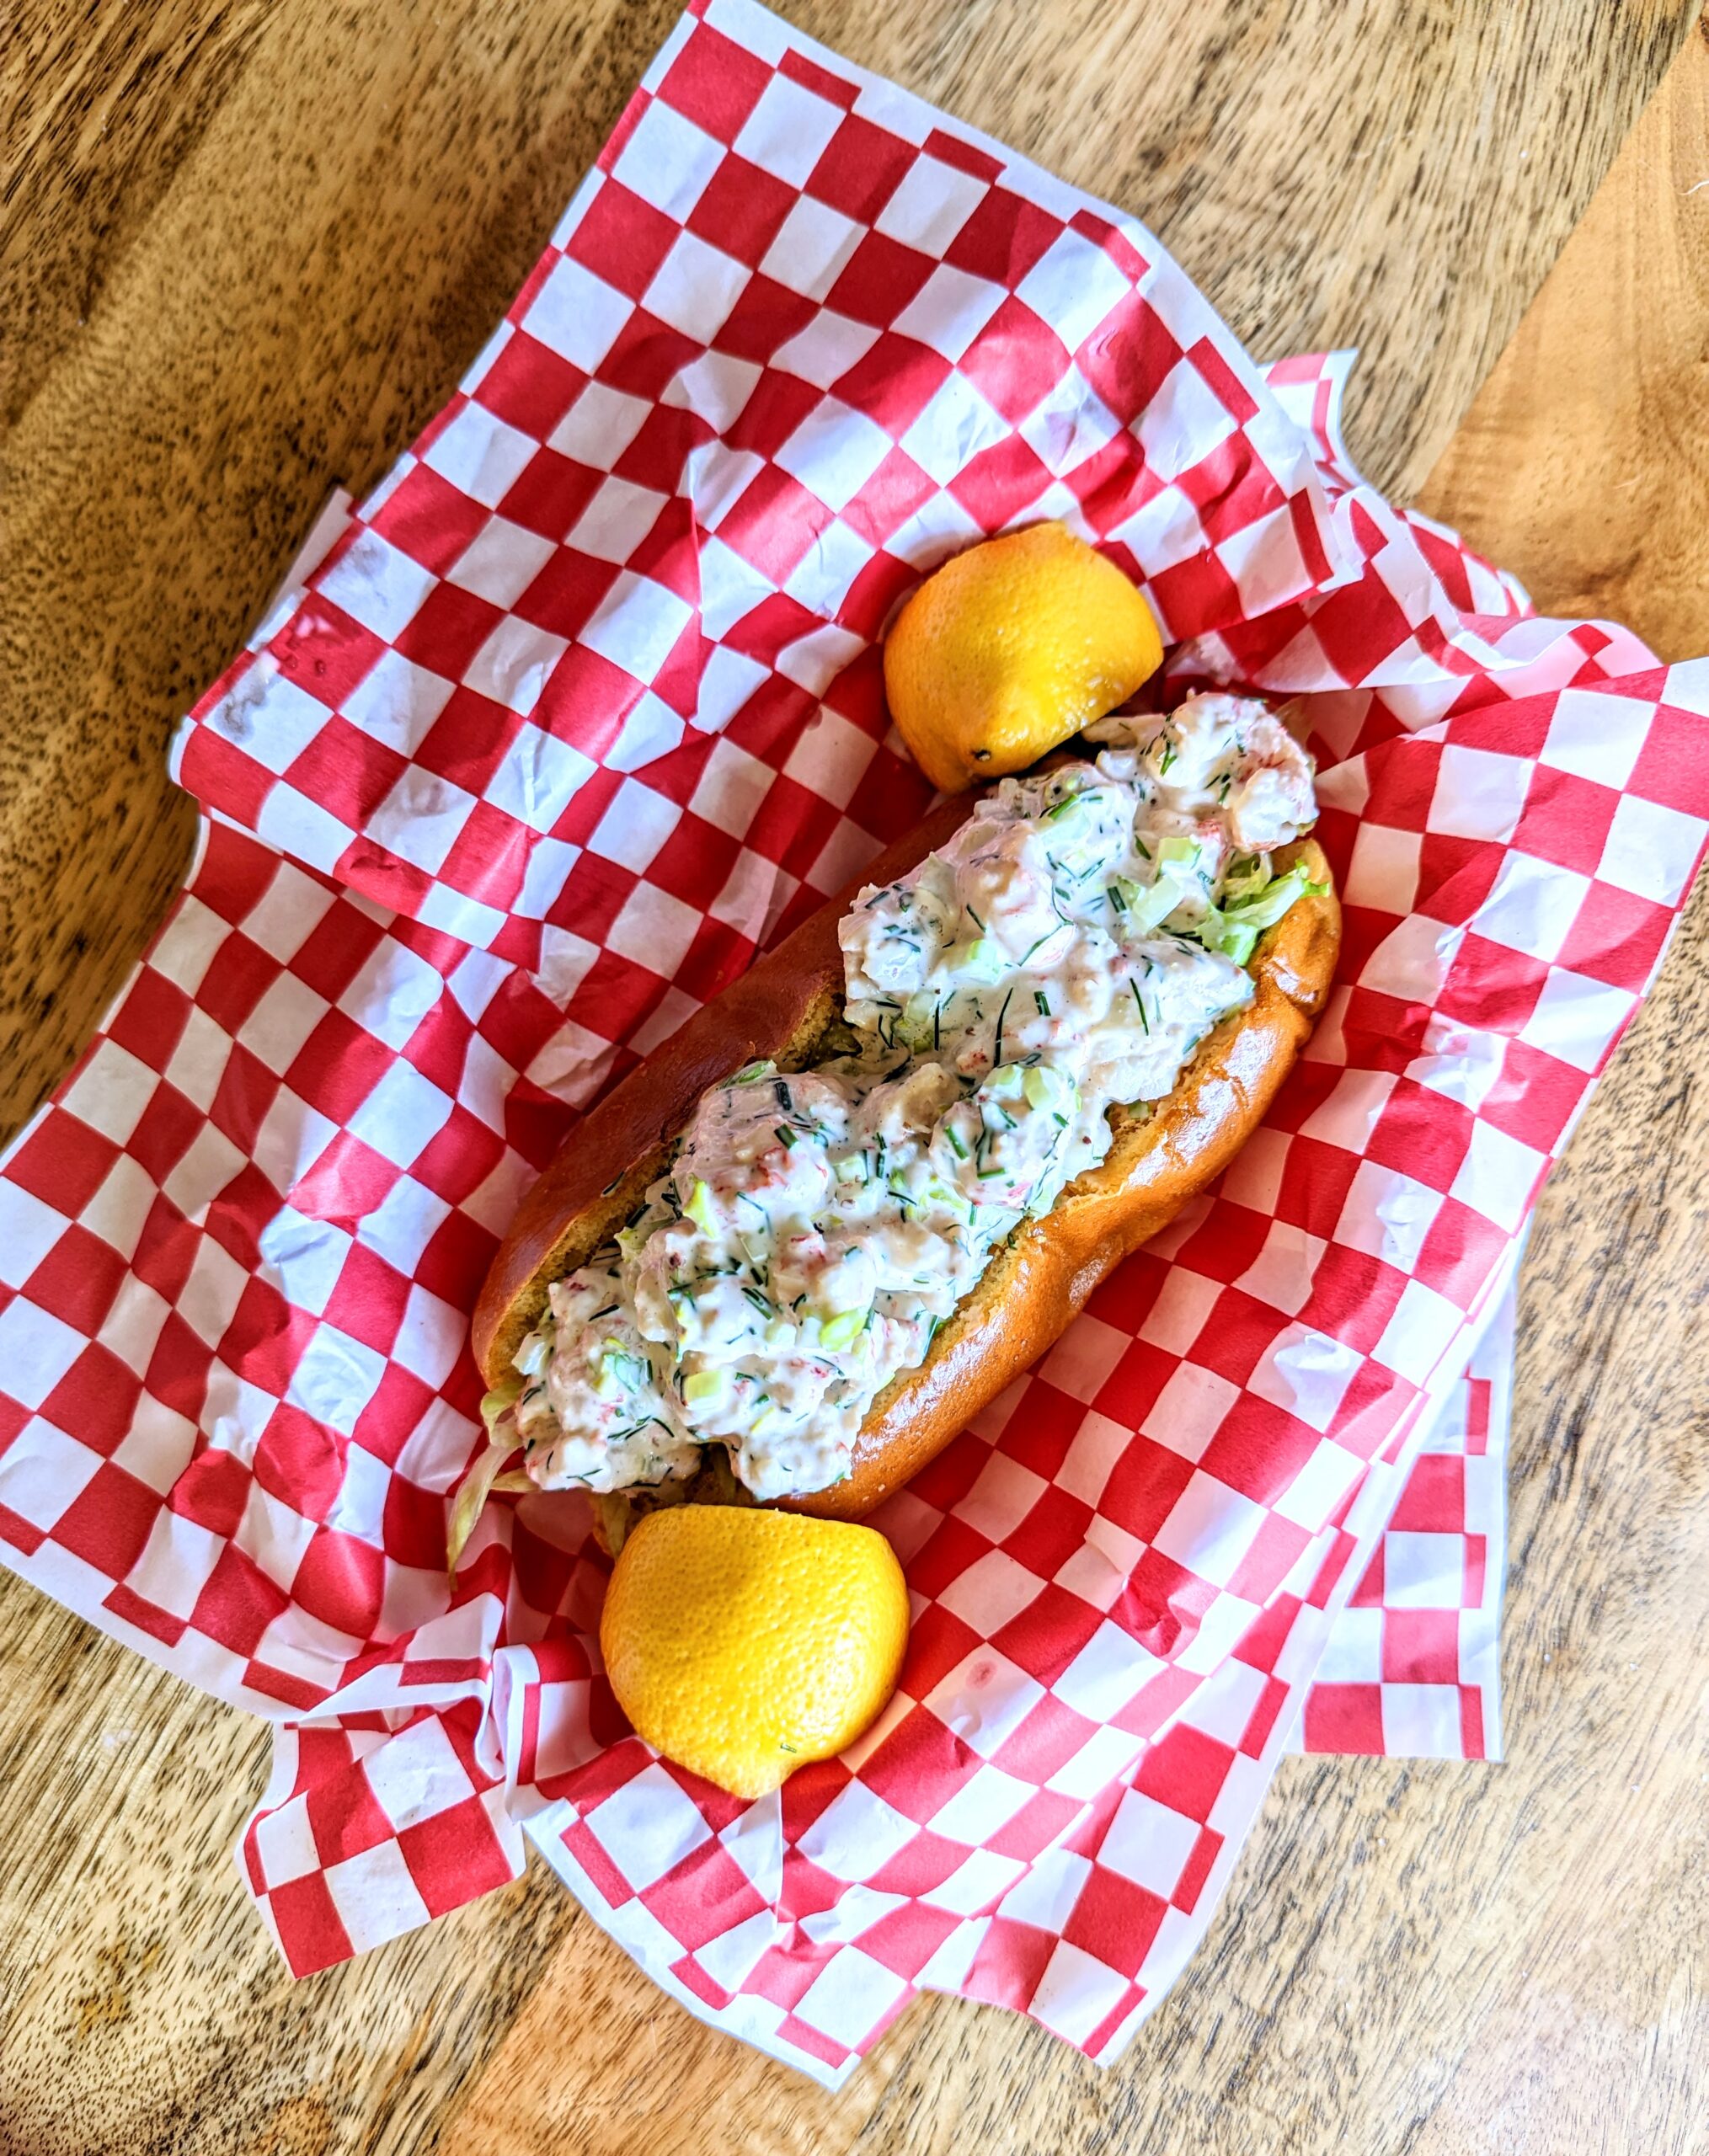 An aerial view of a lobster roll dupe. The langostino roll is plated in vintage red and white checkered diner platters.